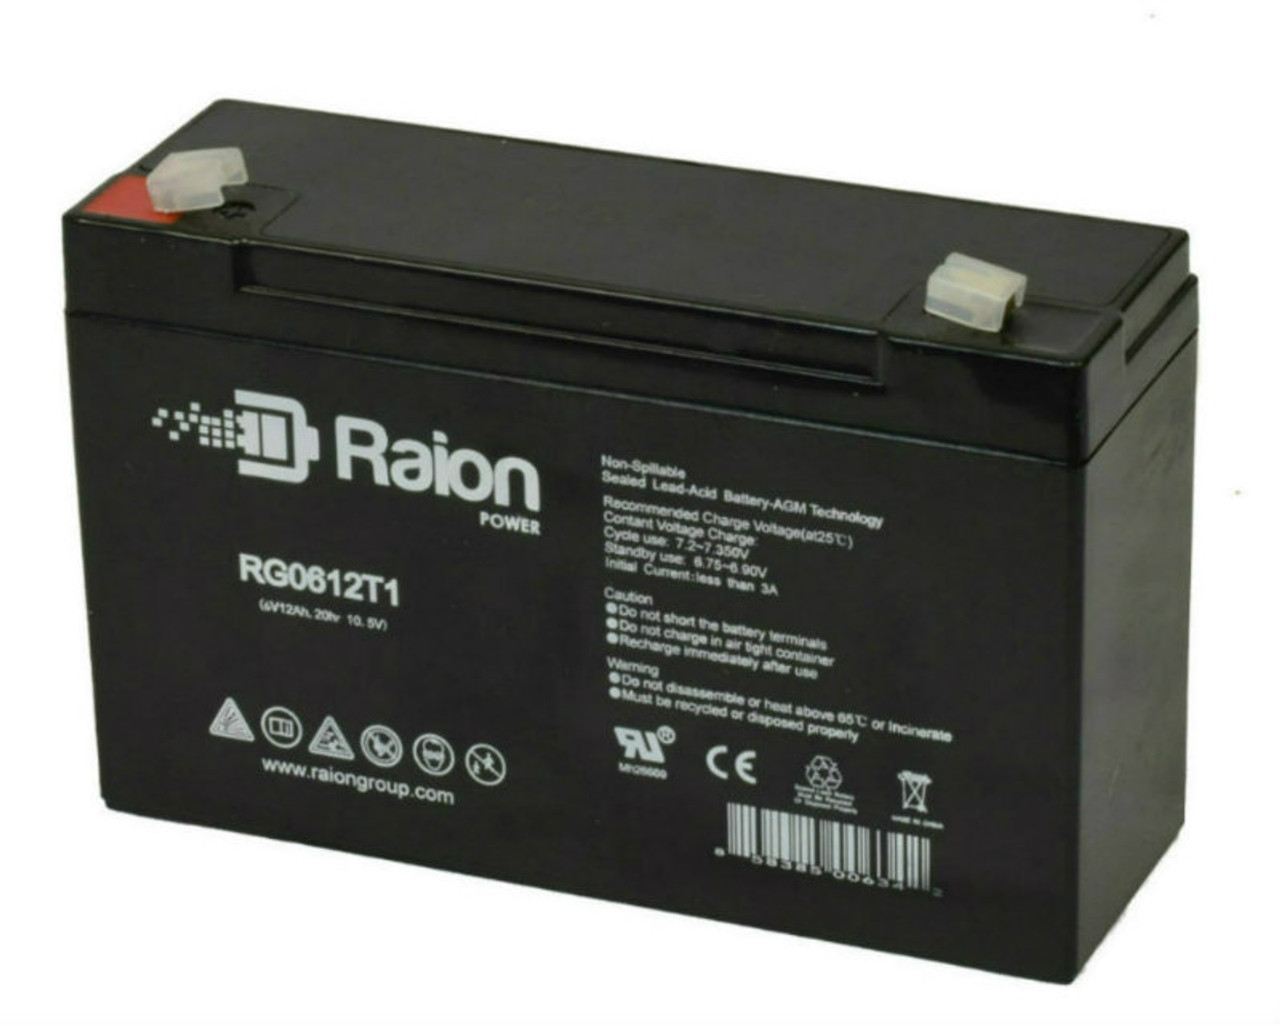 Raion Power RG06120T1 Replacement 6V 12Ah Emergency Light Battery for Dual Lite 12-631